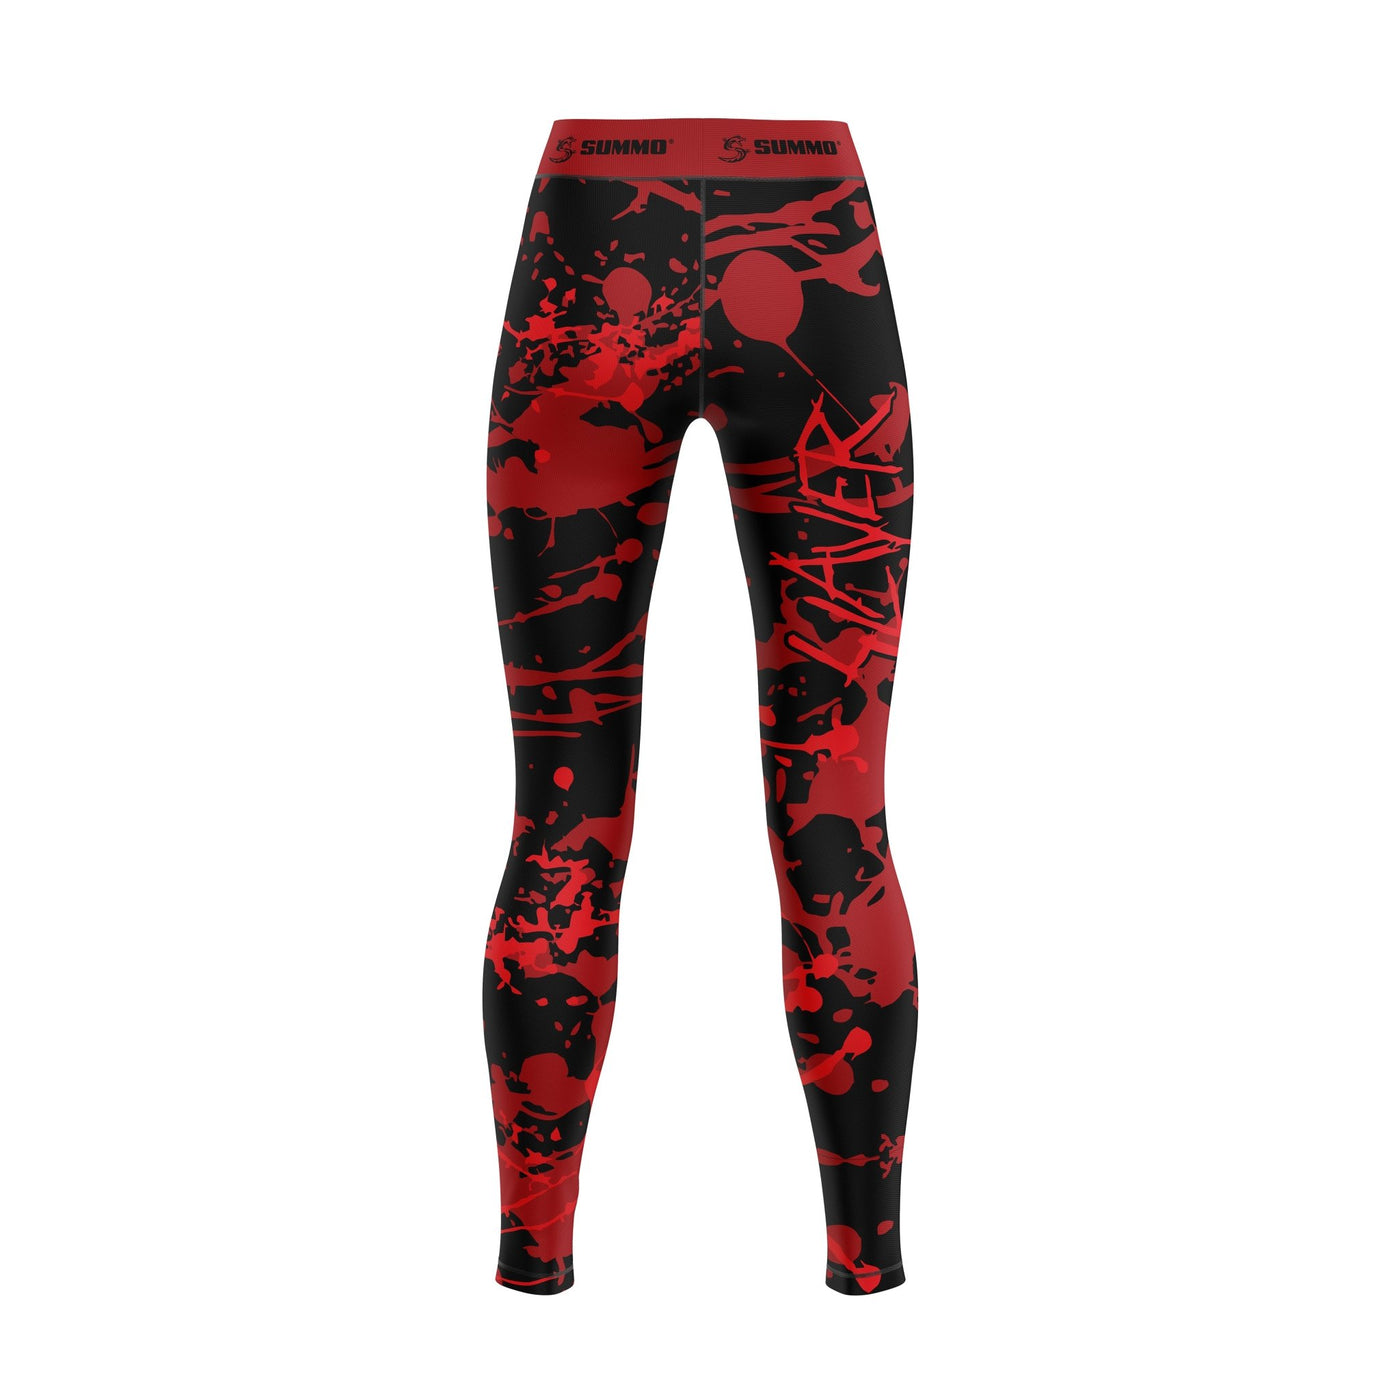 The Slayer Compression Pants for Men/Women - Summo Sports